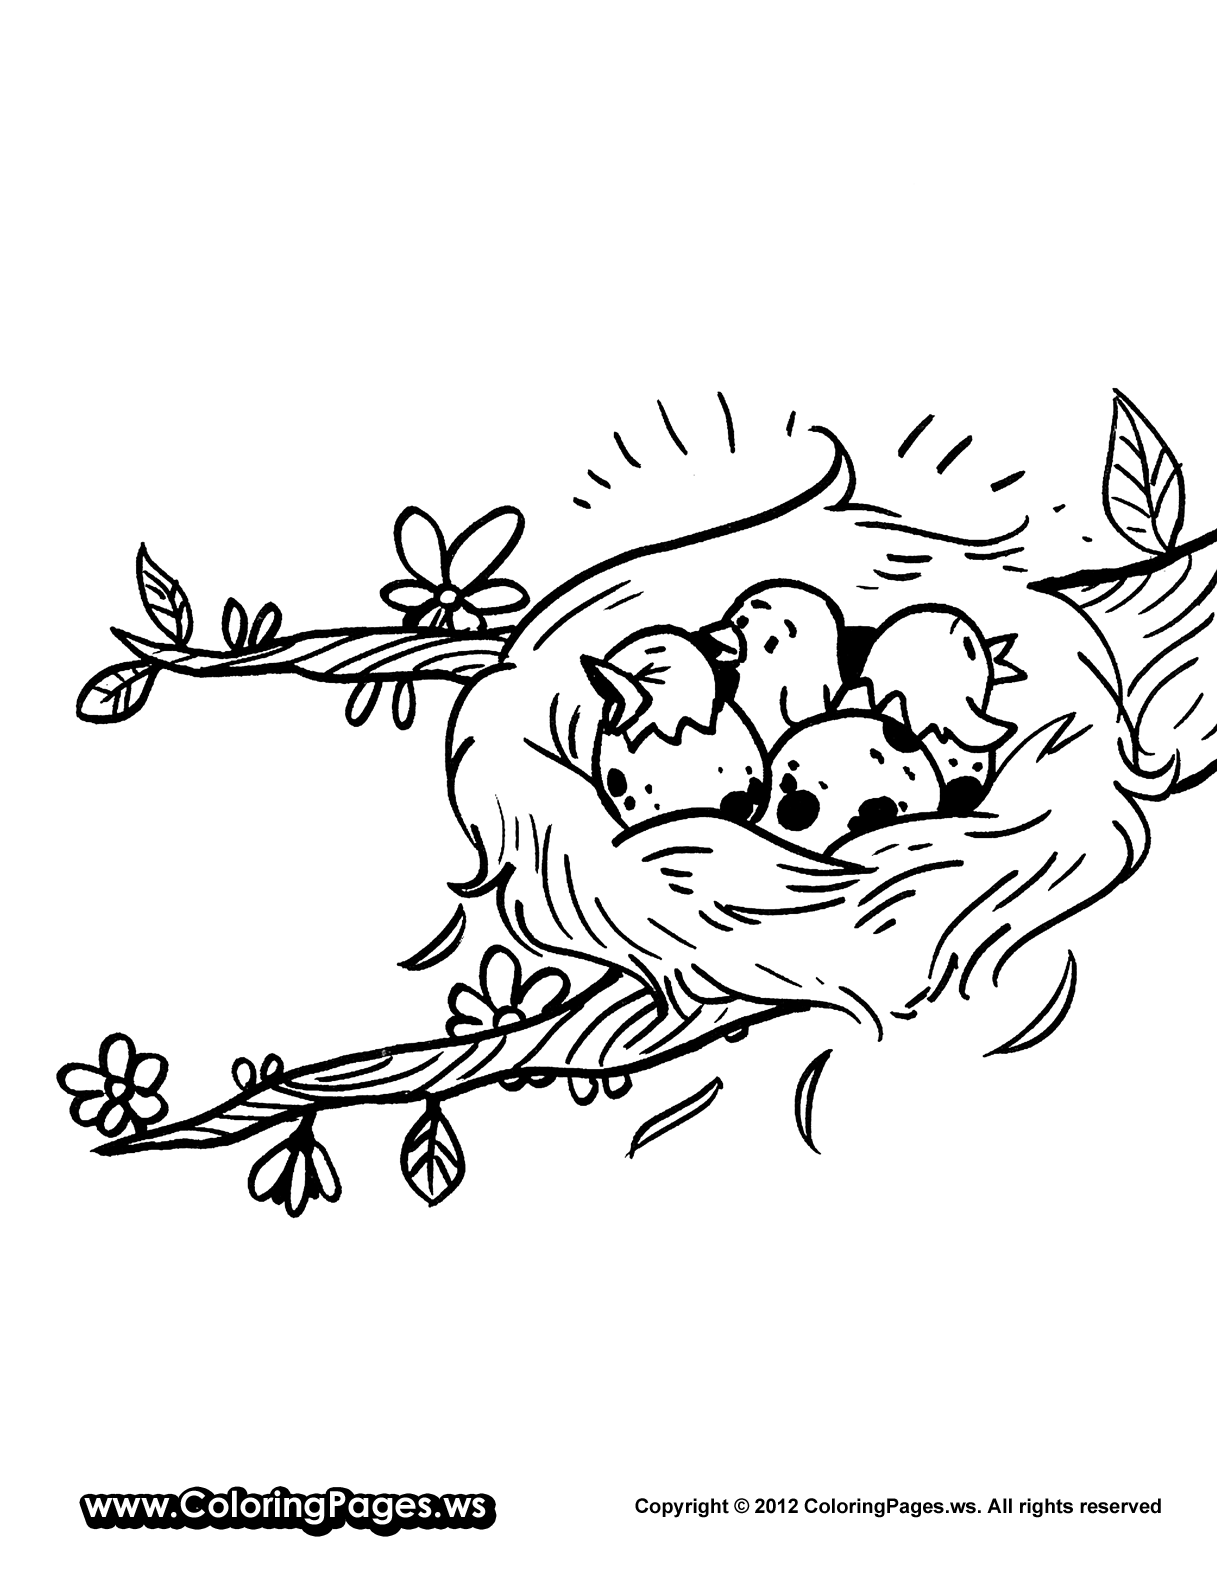 Free Nest Coloring Page, Download Free Nest Coloring Page png ...